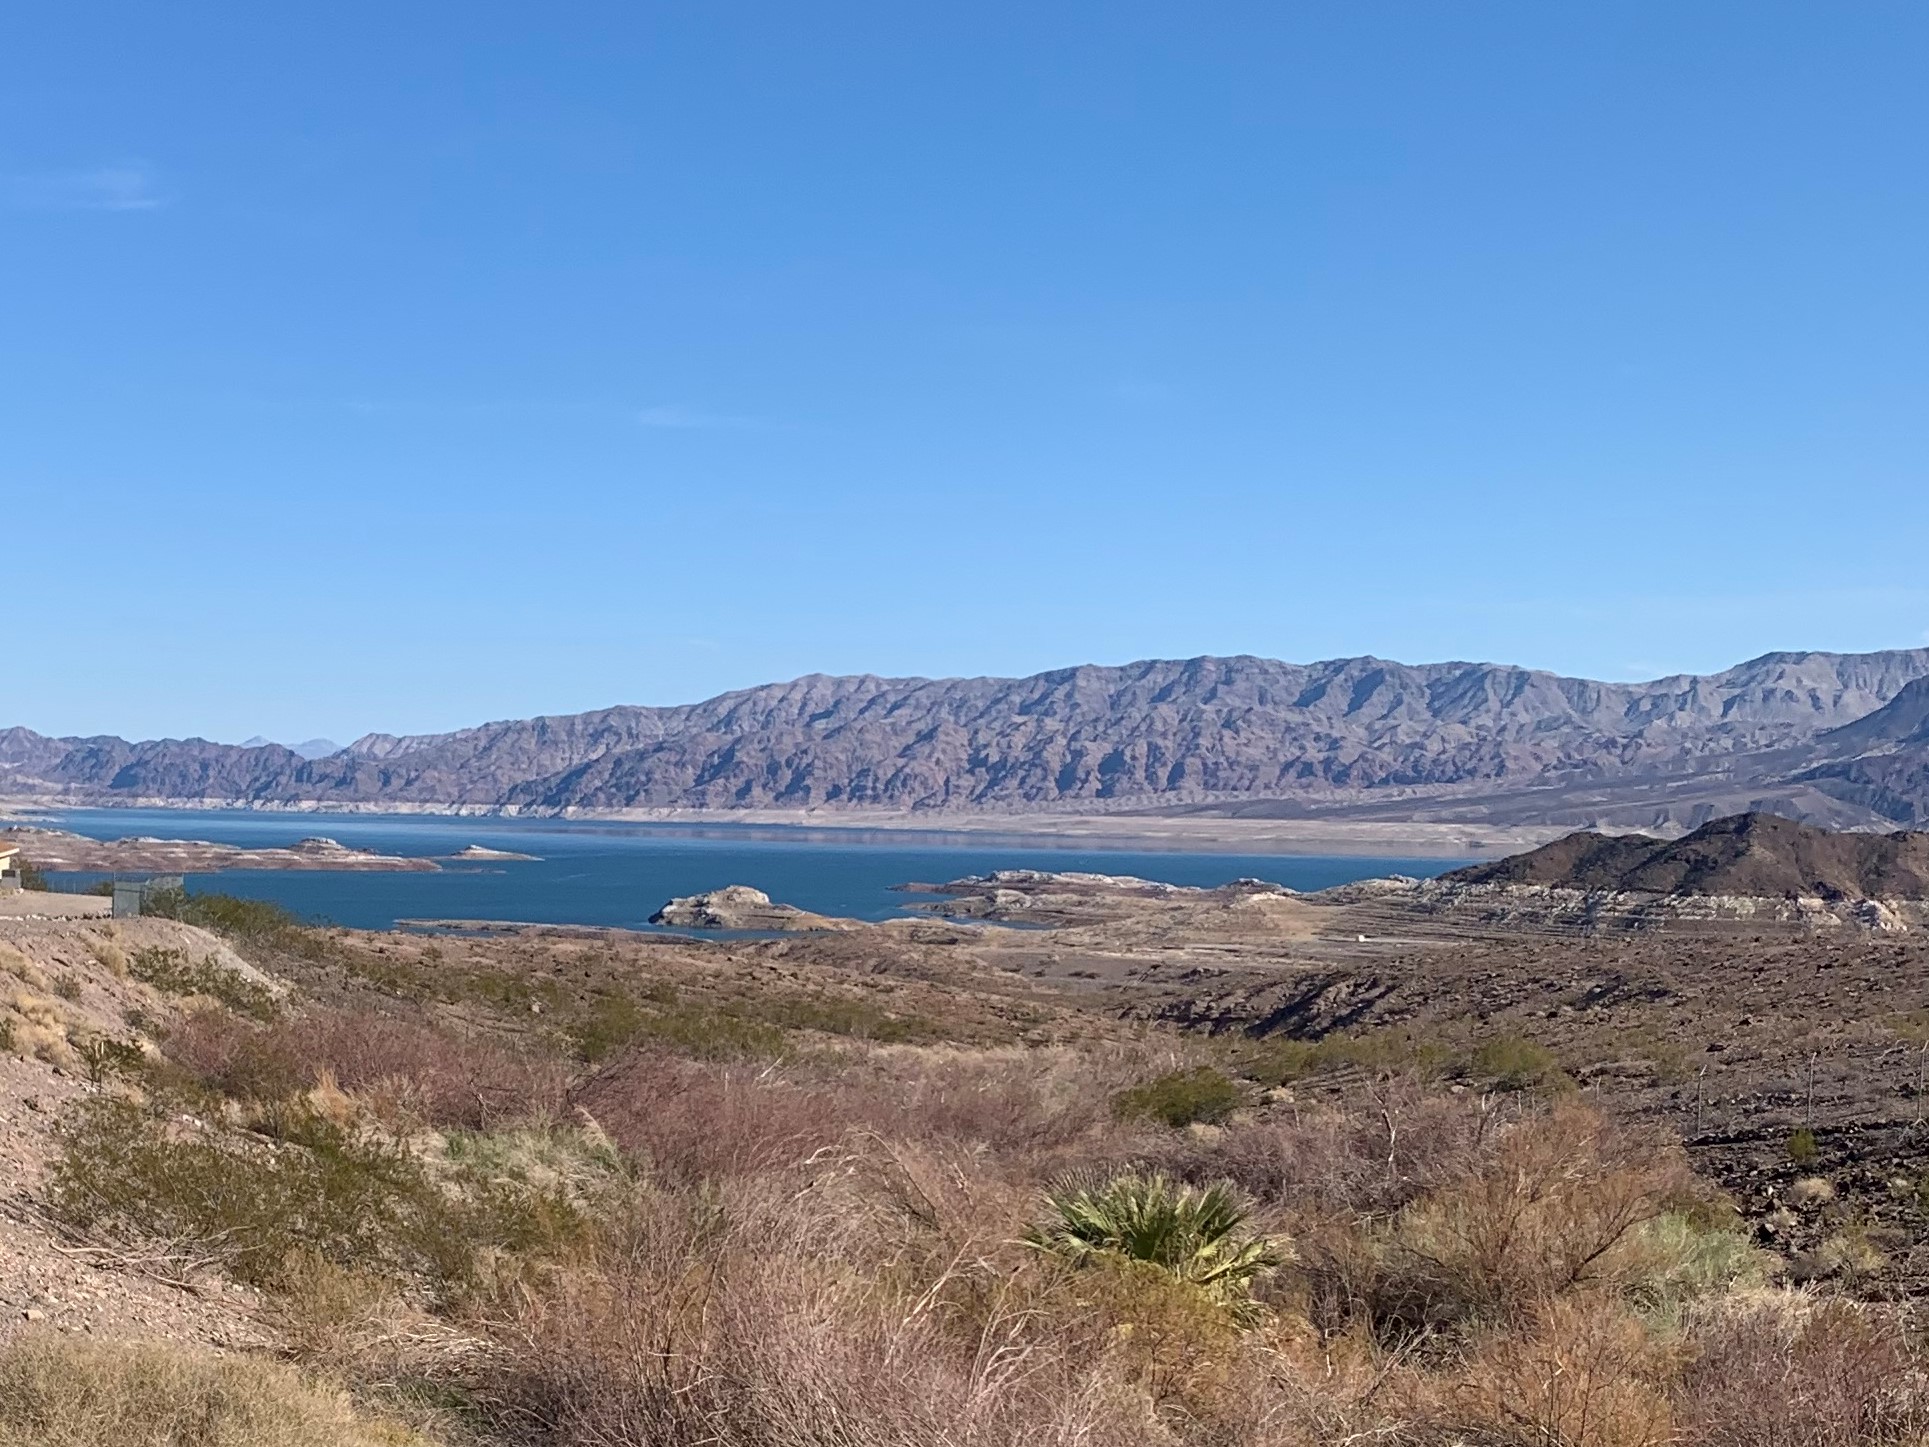 The 2023 Fish Hatchery Prescribed Burn unit in Lake Mead National Recreation Area